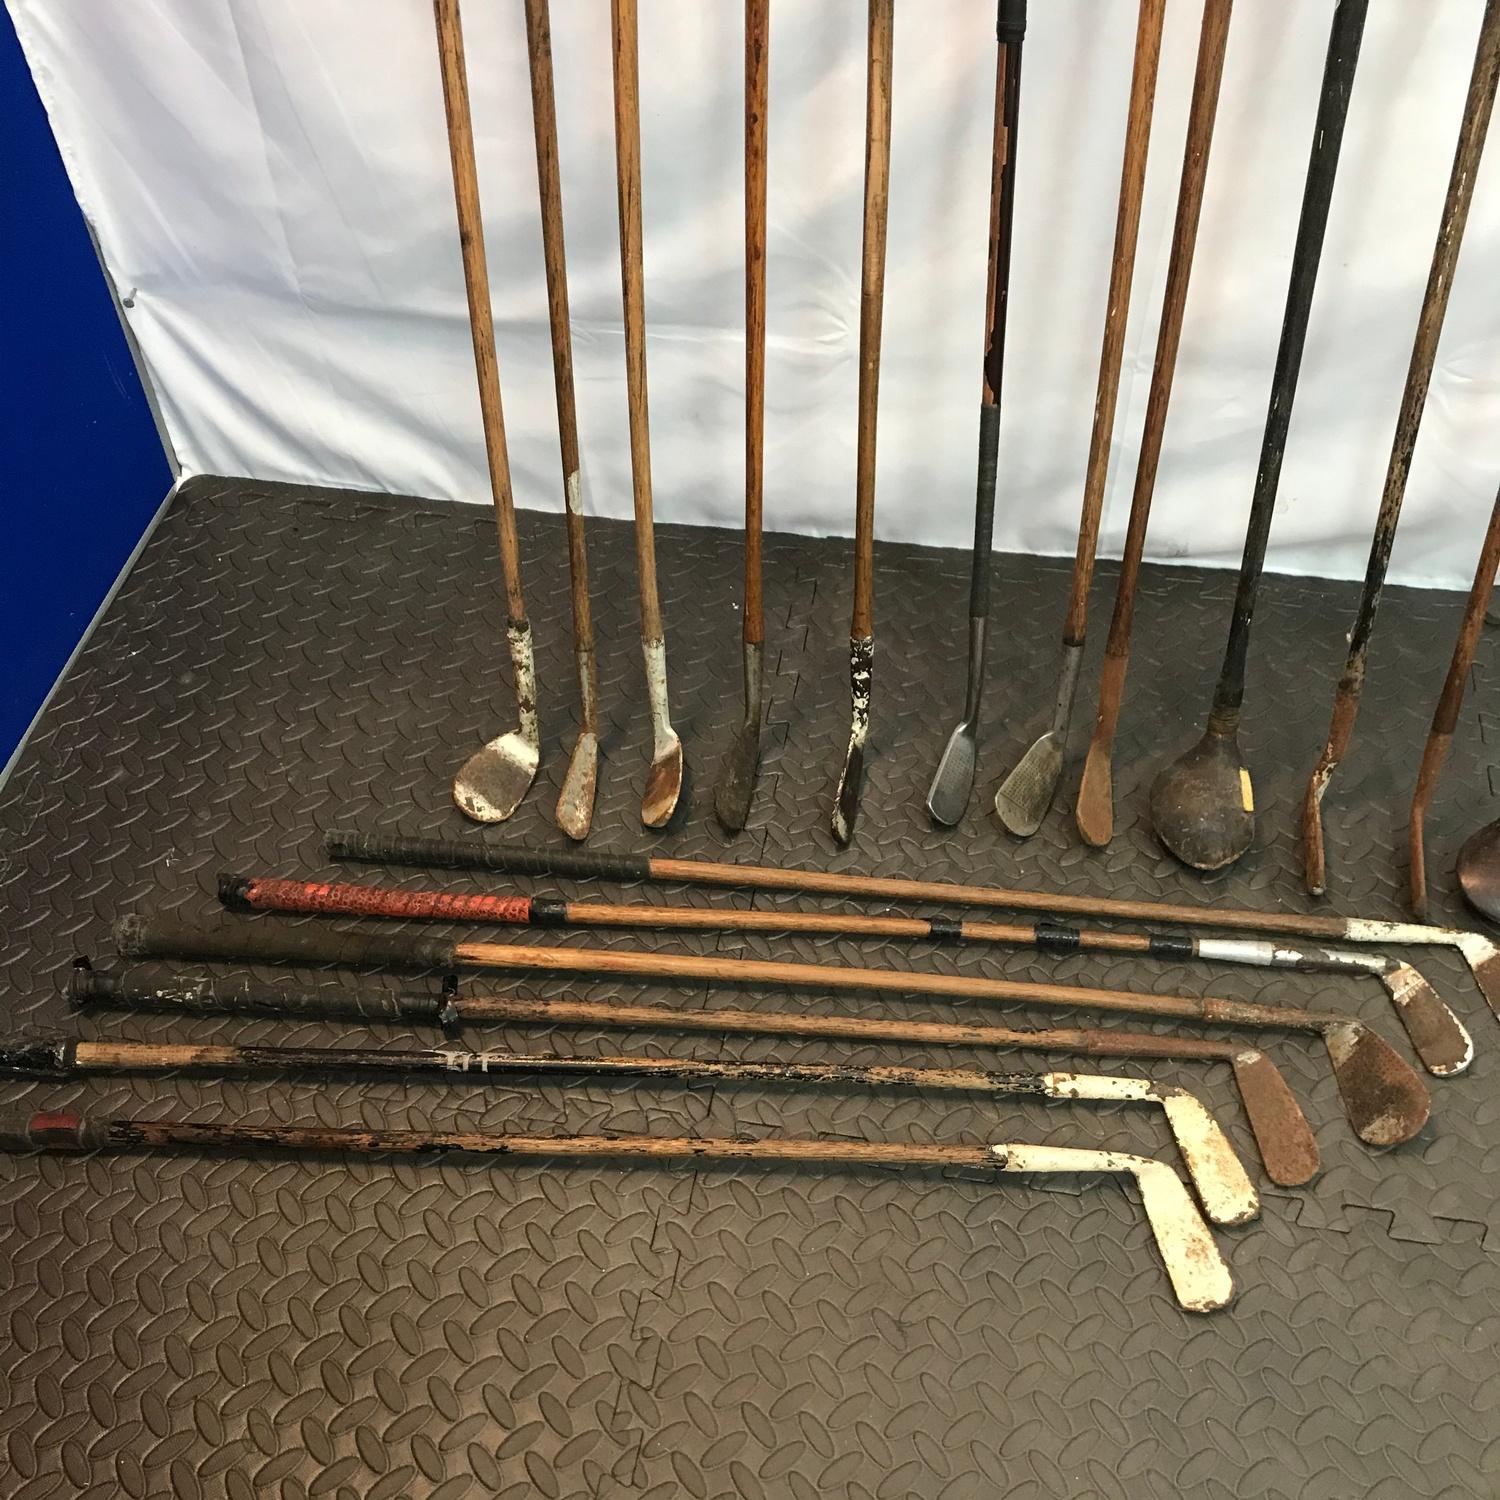 A Large collection of vintage Hickory Shaft golf clubs. Includes makes such as J.G.SMITH, Cann & - Image 2 of 18